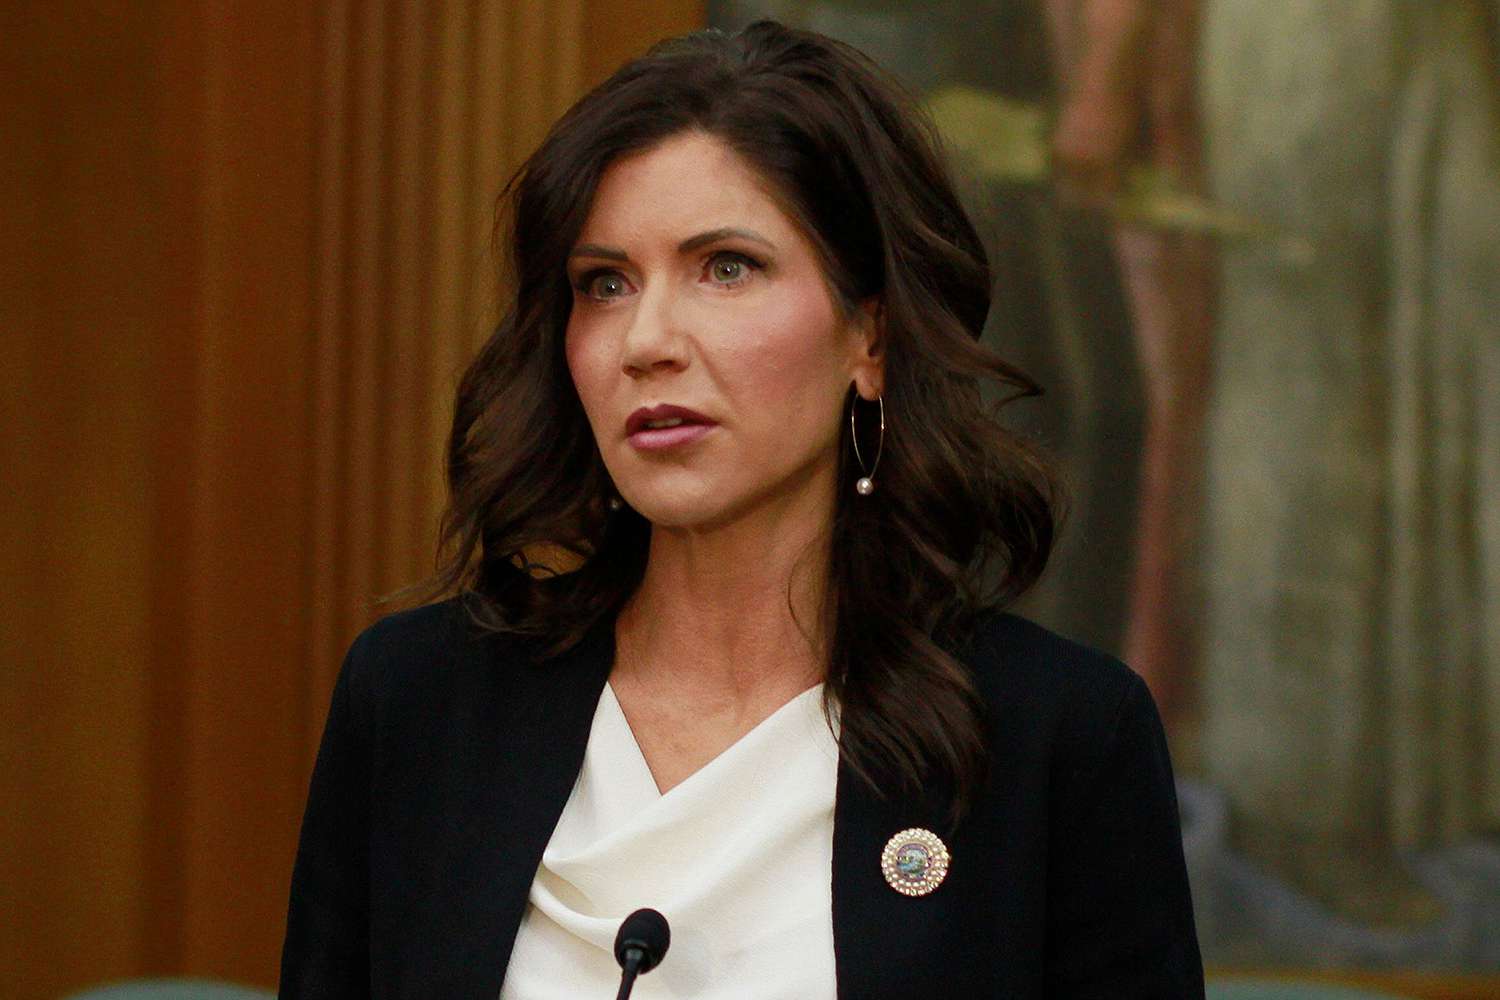 South Dakota Governor Kristi Noem Shot and Killed Her Puppy, the Trump VP Candidate Reveals in New Book